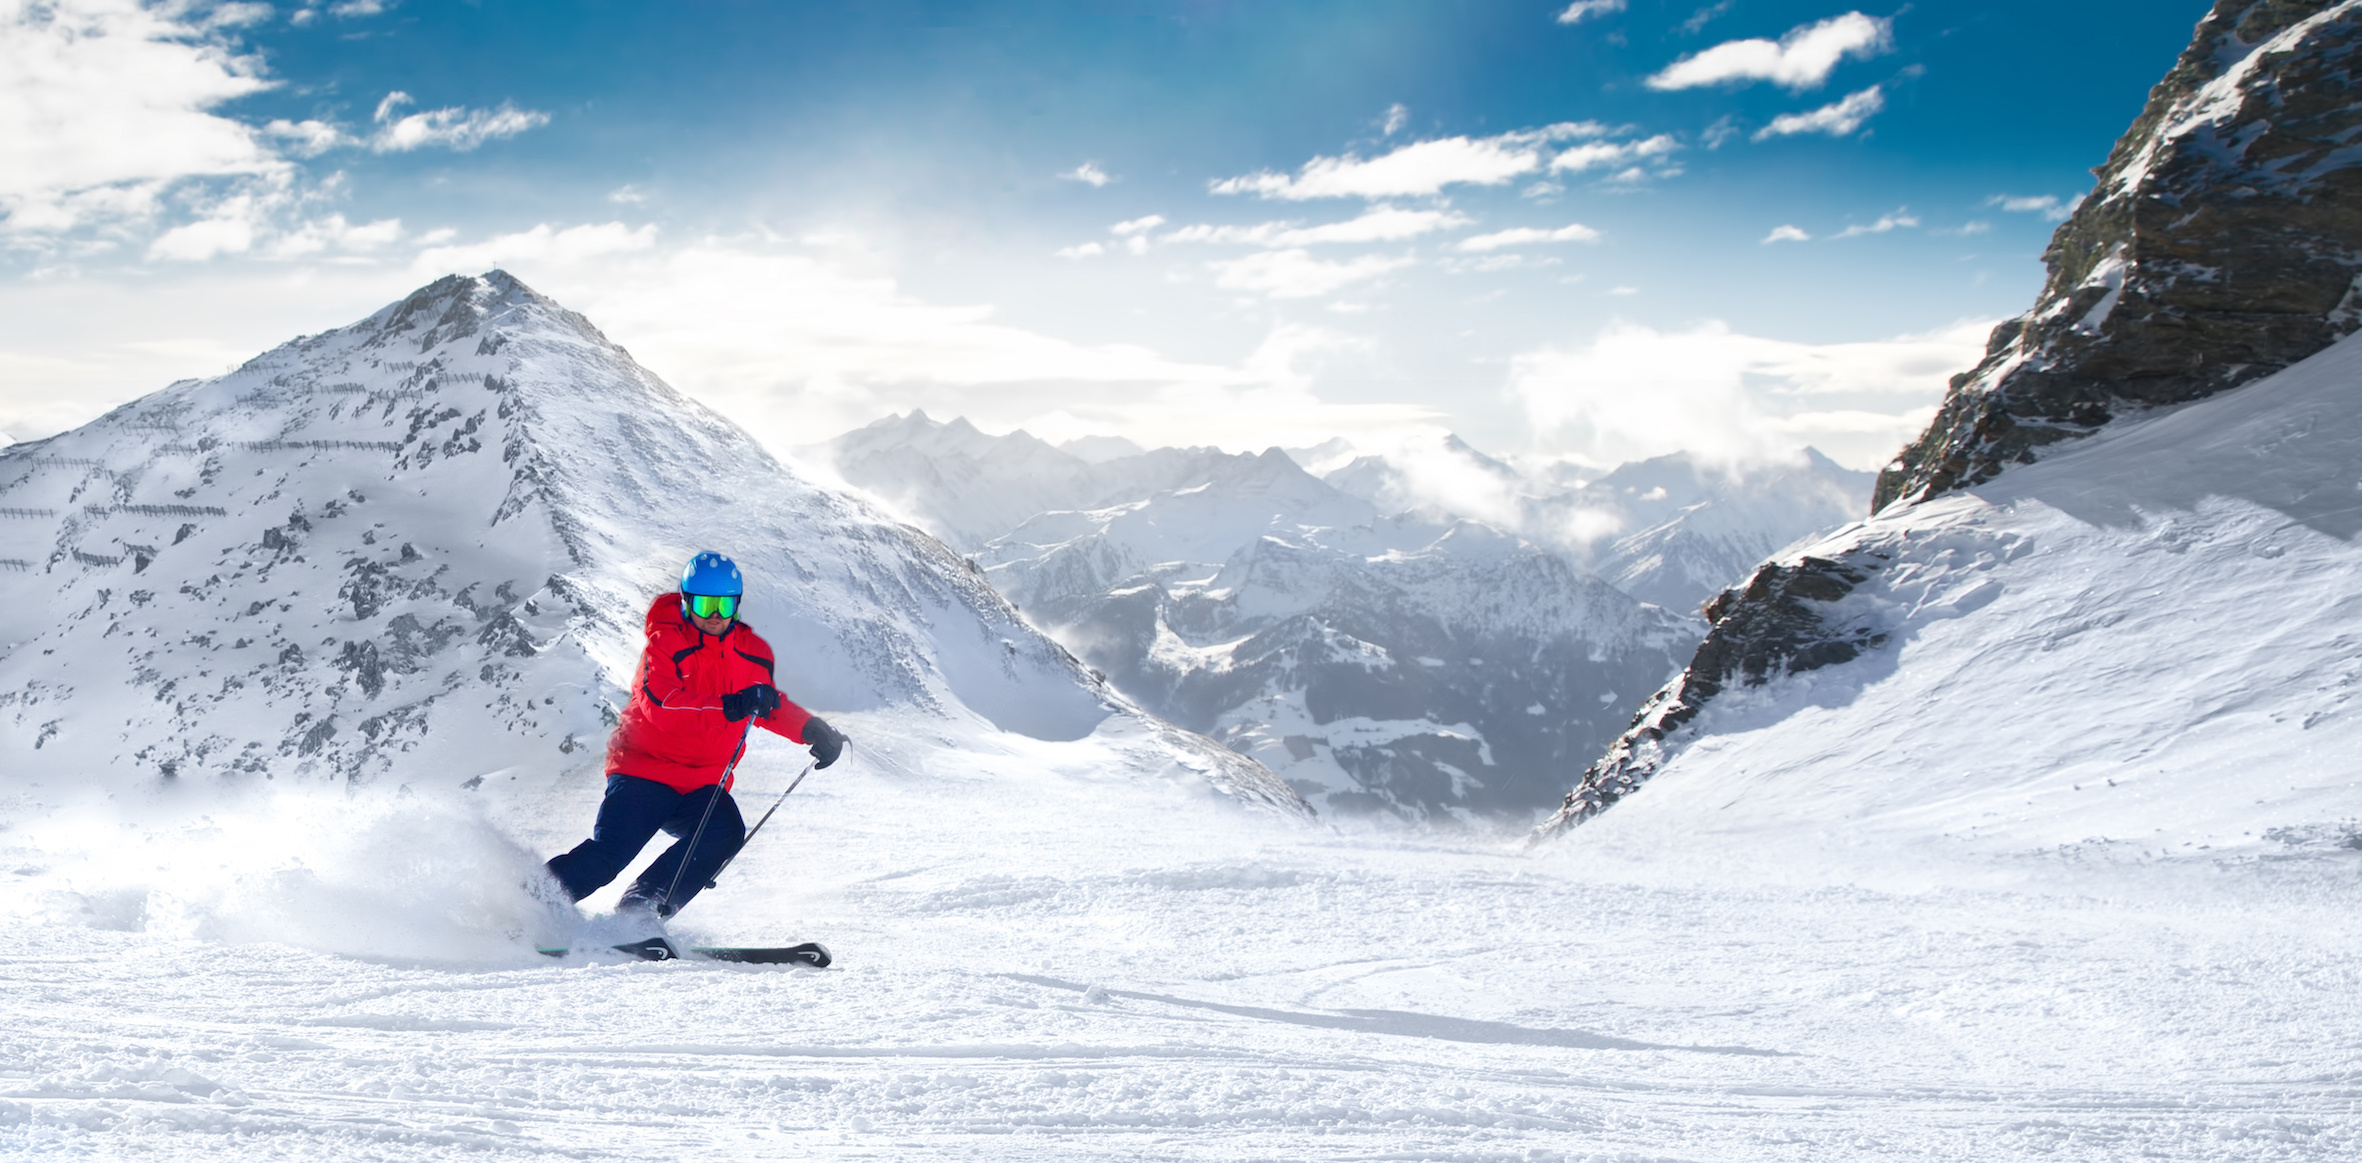 Skiing: Winter Destinations, Travel, Events, Germany, Downhill in a wavy course. 2370x1170 Dual Screen Wallpaper.